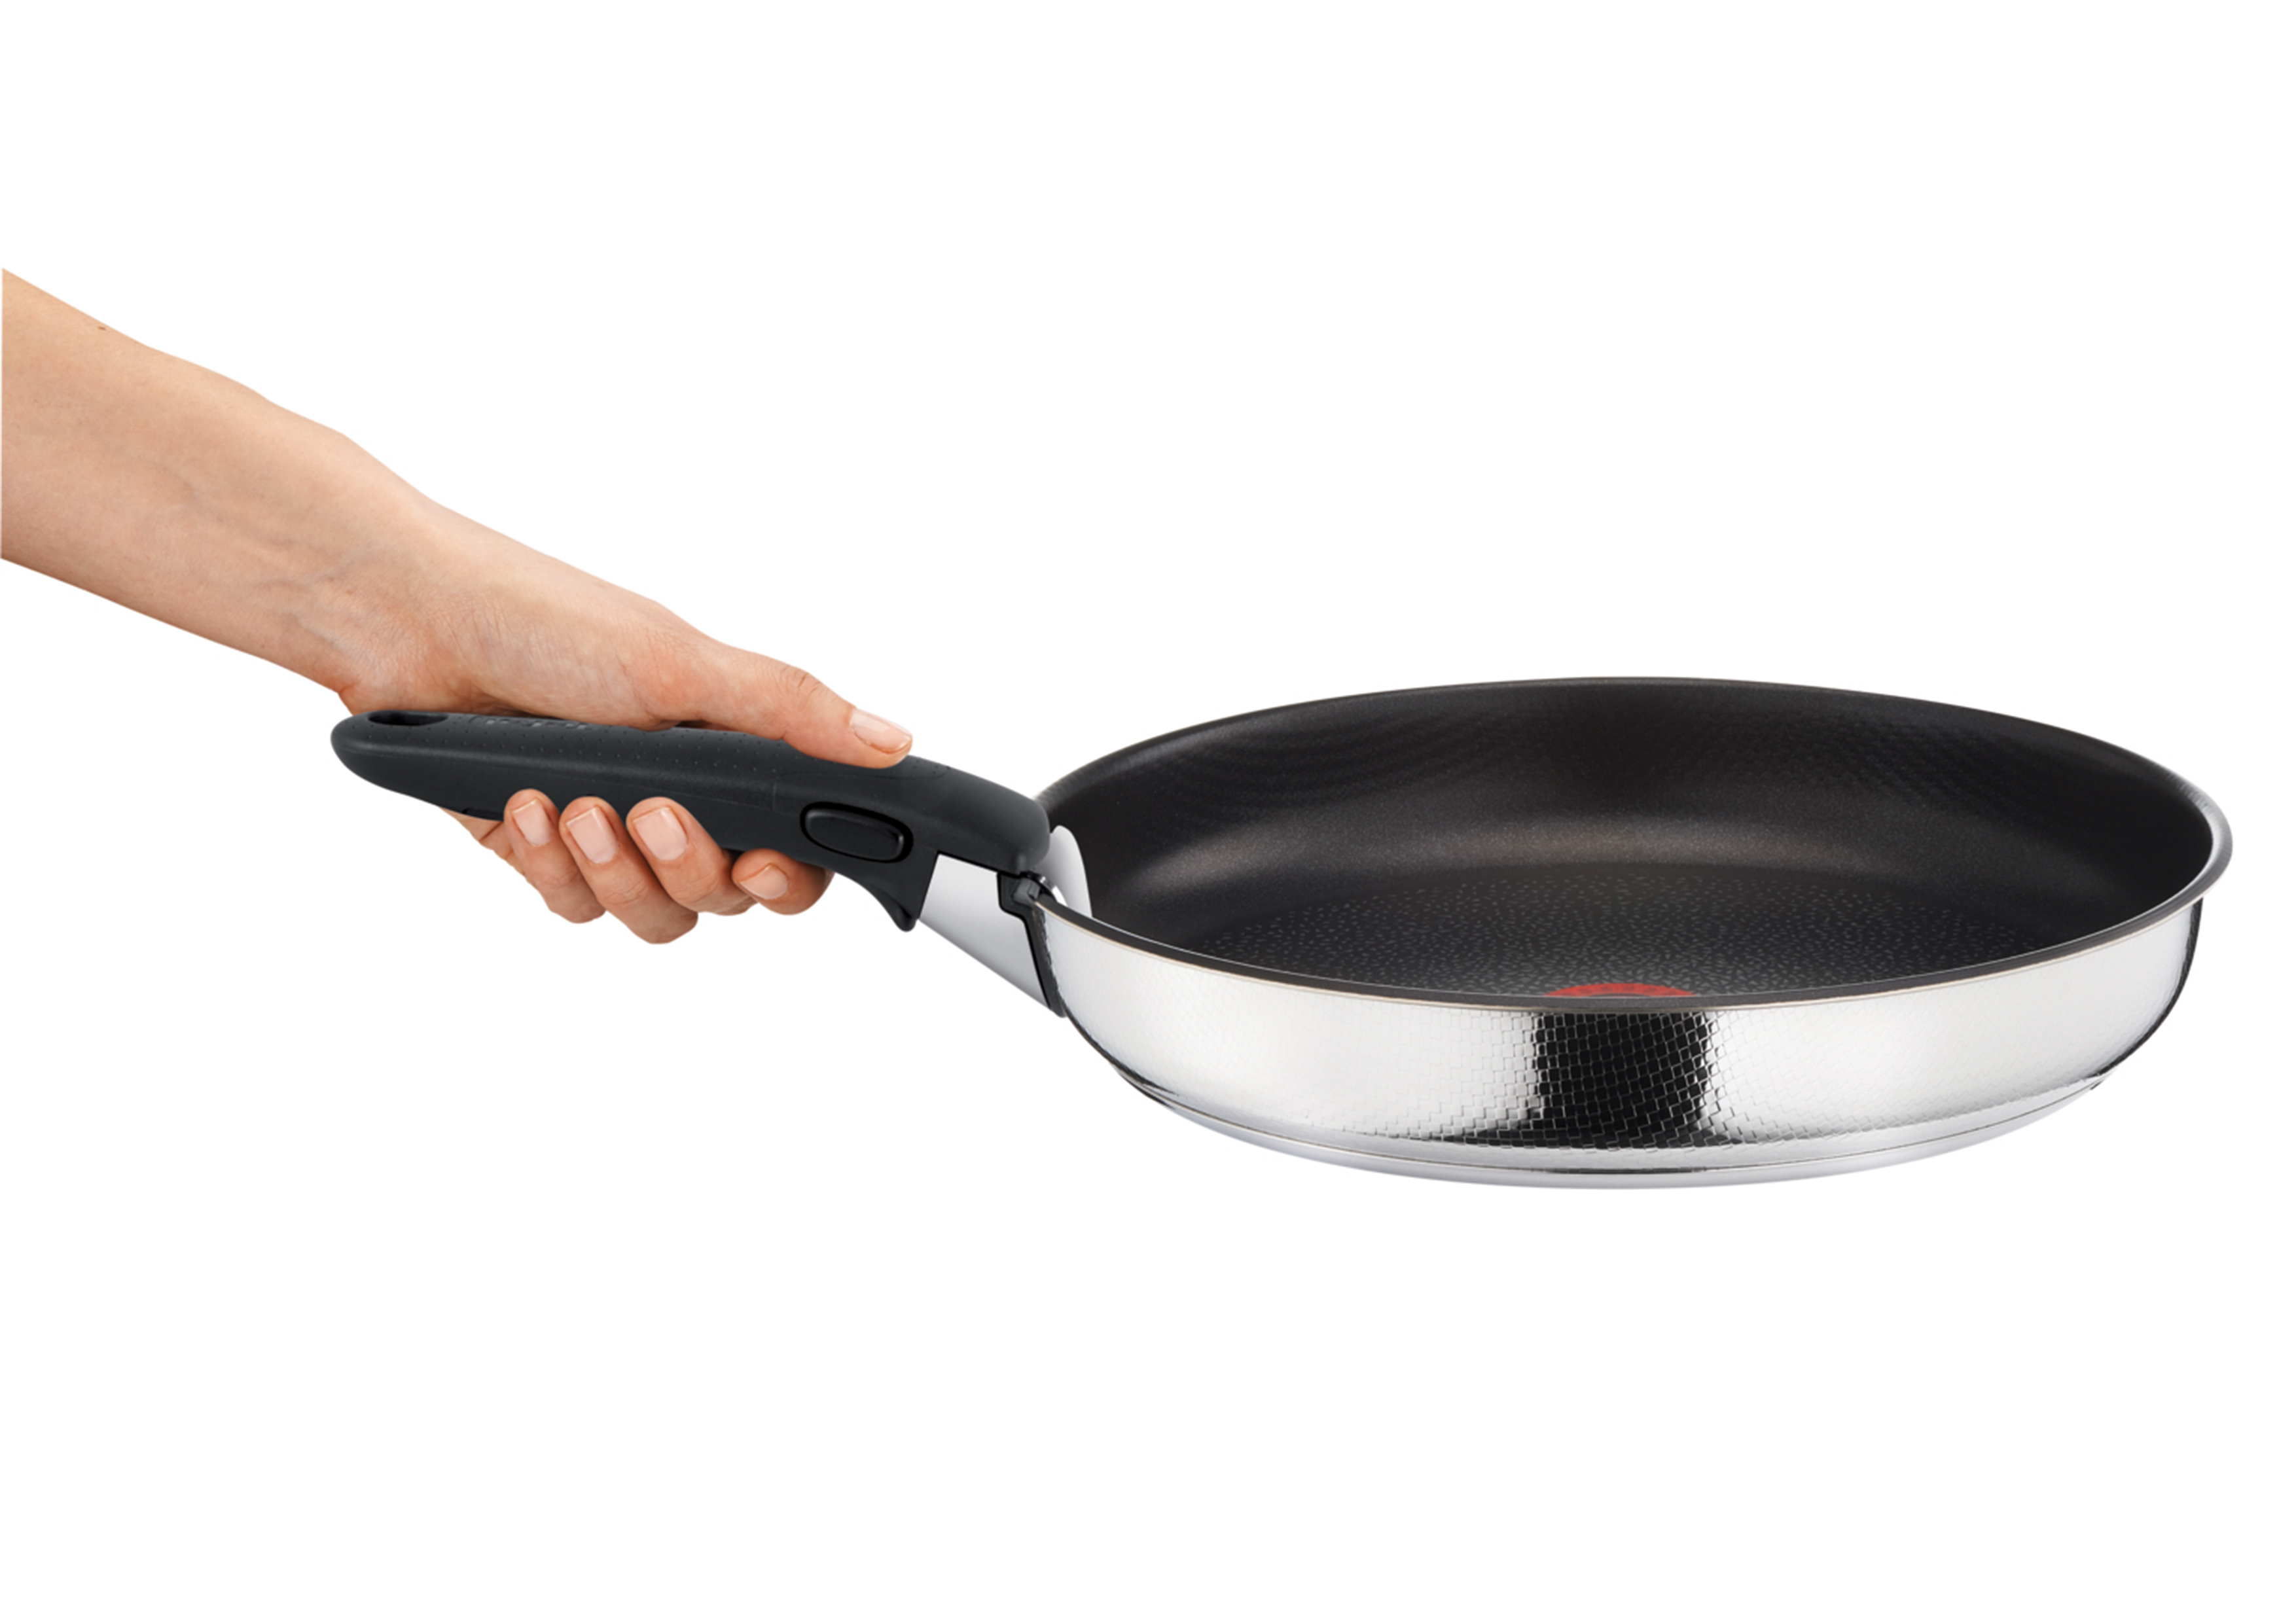 https://cdn.yournet.space/good-design.org/2020/Product%20Design/Housewares%20and%20Objects/2629-Tefal%20Ingenio%20Preference%20Stainless%20Steel%2013pc%20Set/Tefal%20Ingenio%20Preference%20Stainless%20Steel%2013pc%20Set%204.jpg